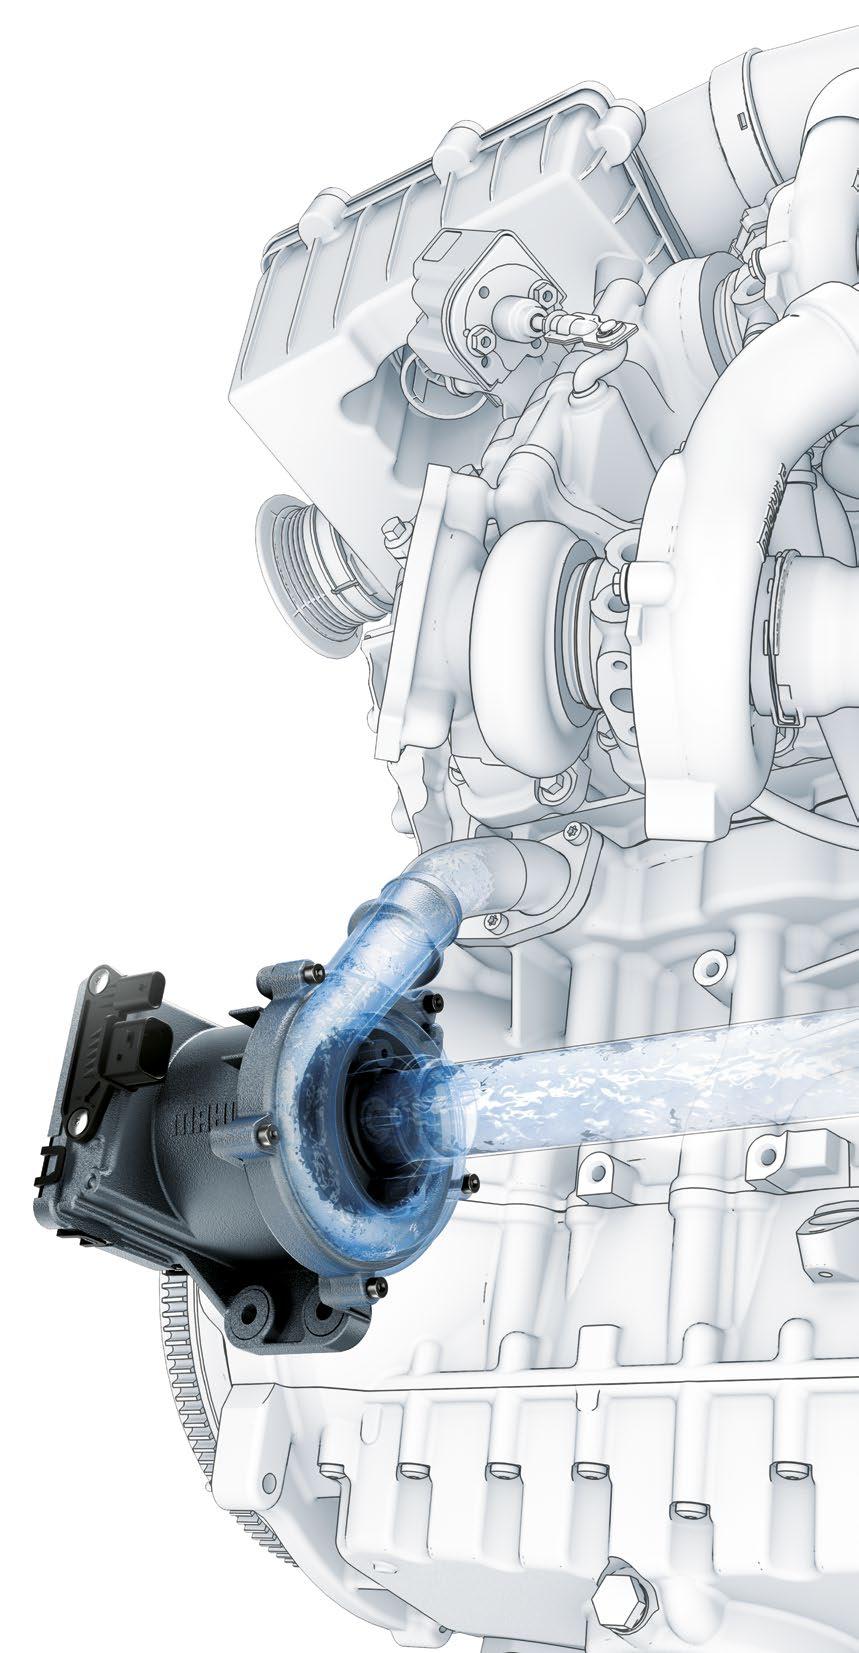 DEVELOPMENT Cooling Electrical 48-V Main Coolant Pump to Reduce CO 2 Emissions Mahle has developed an electrical main coolant pump for the 48-V on-board net.